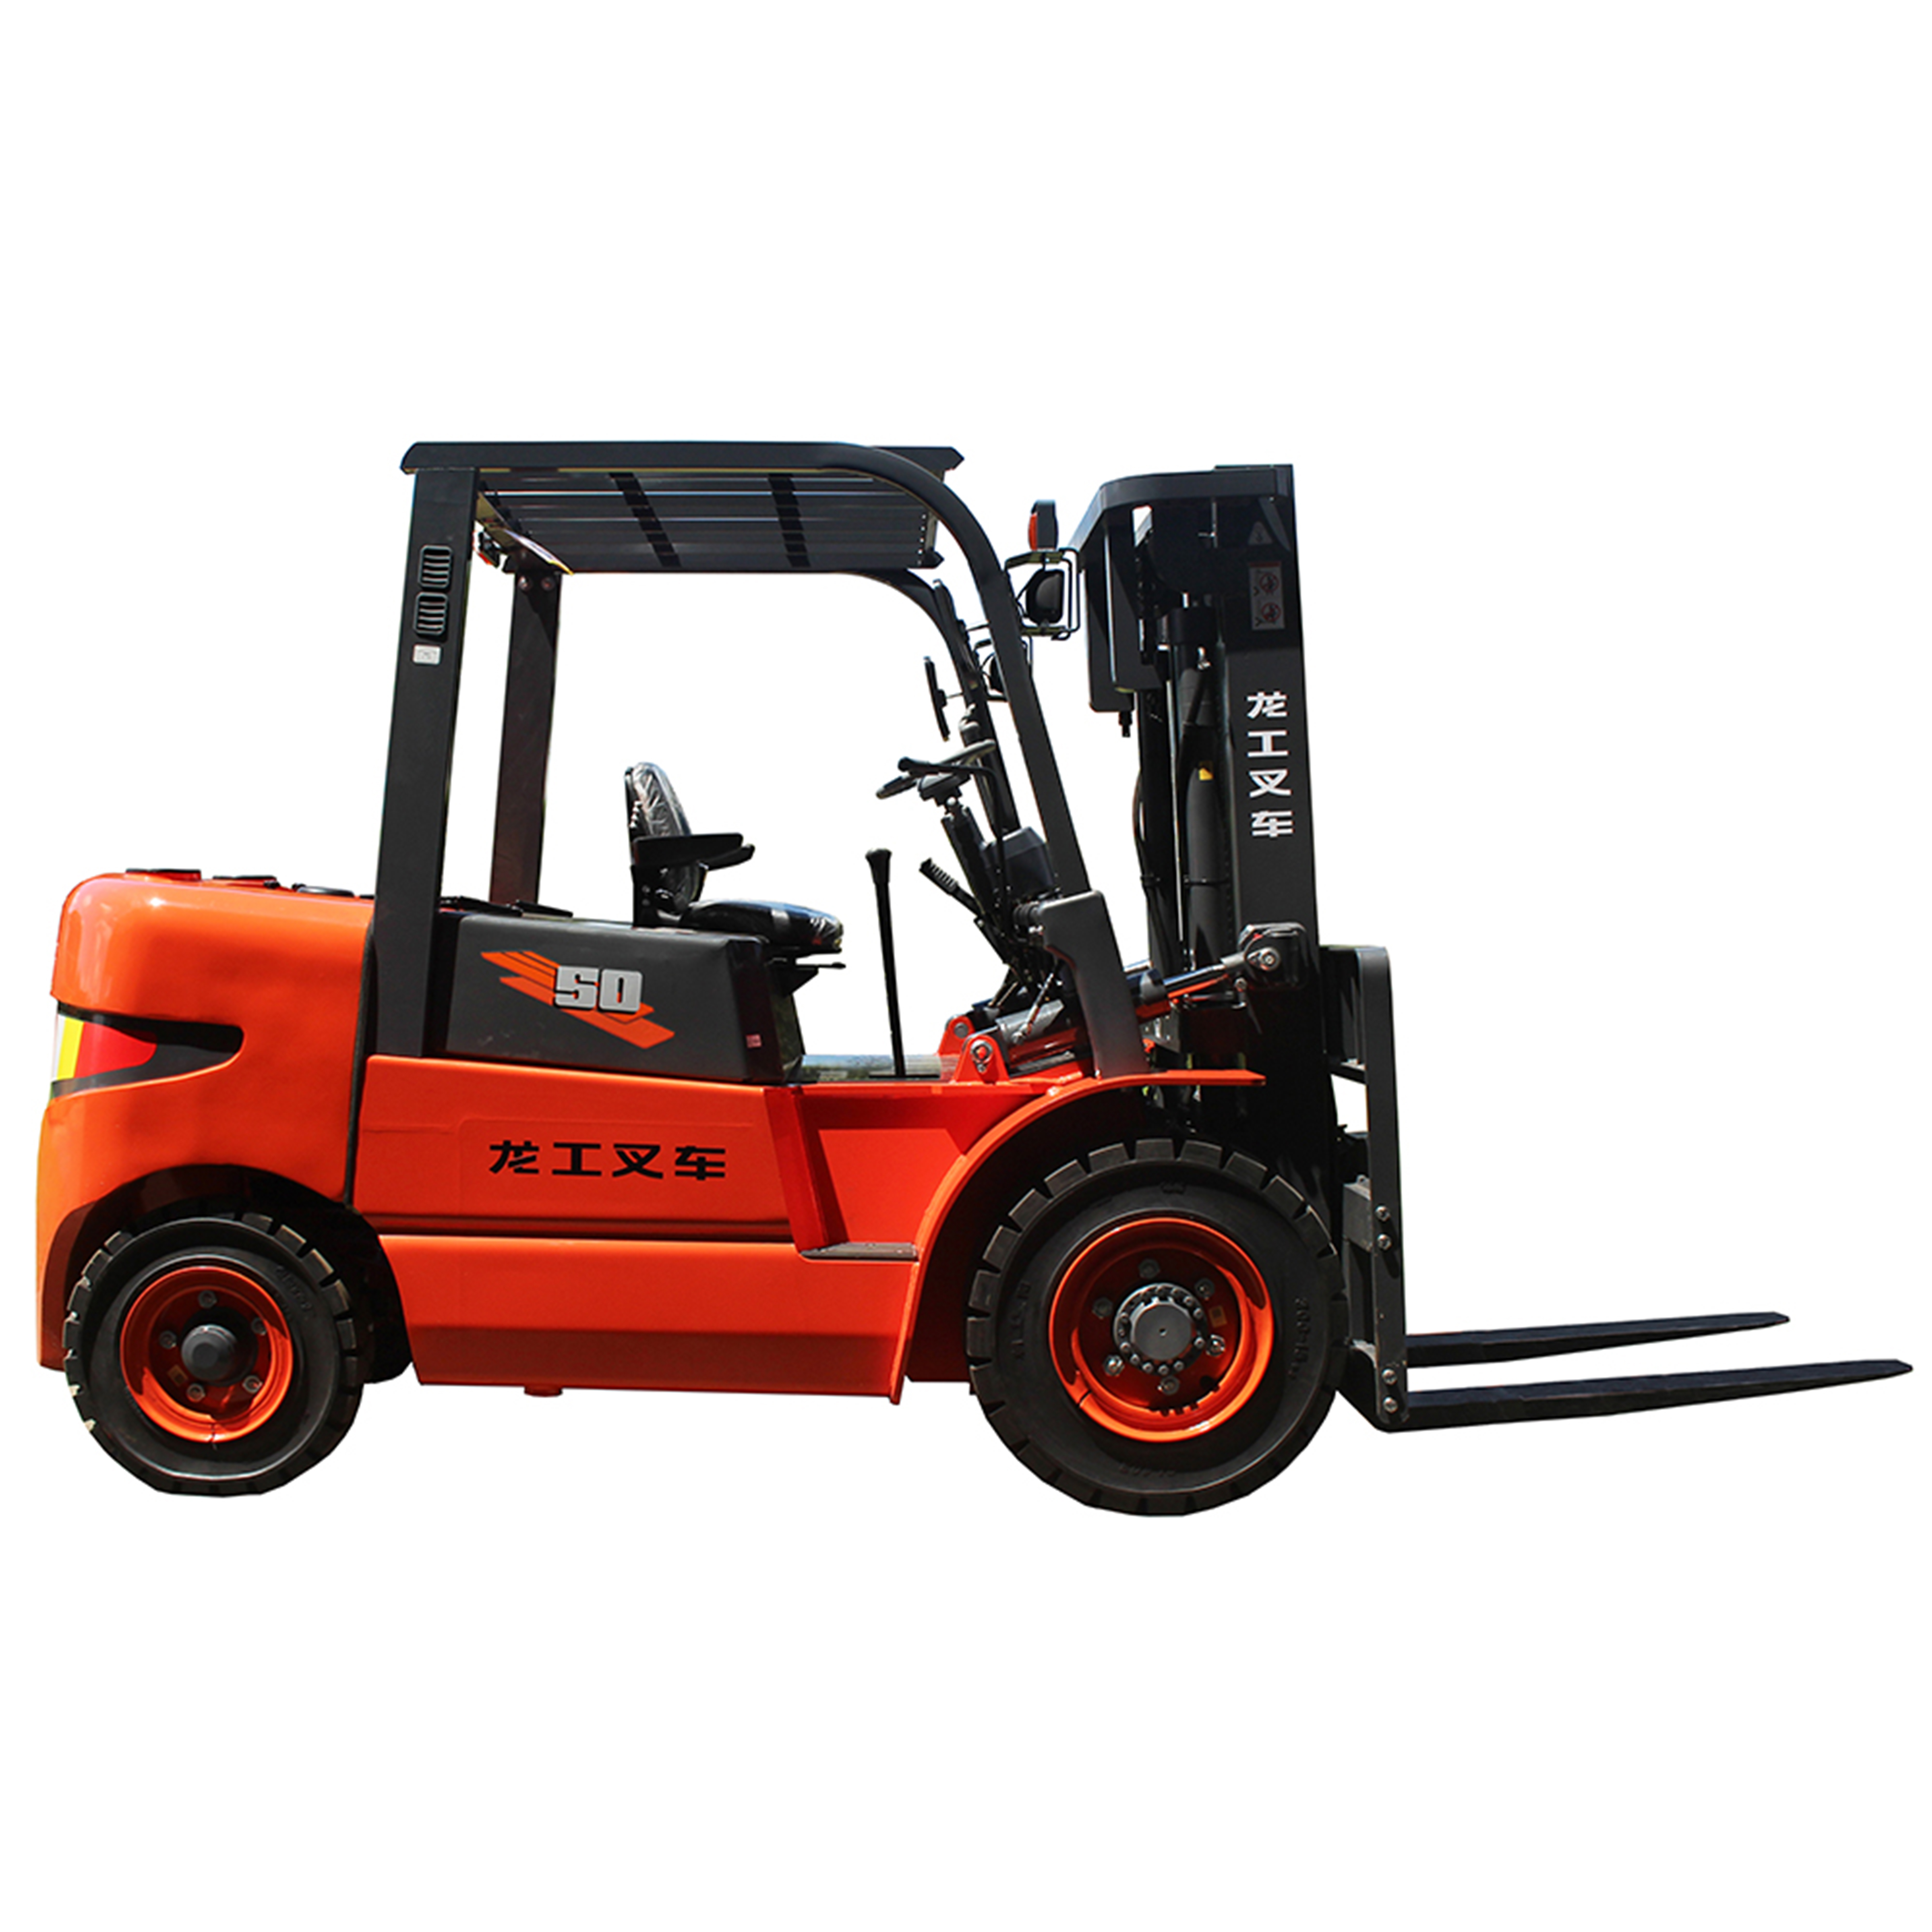 LONKING LG50 5 ton portable china narrow aisle all terrain diesel forklift Fuel forklift